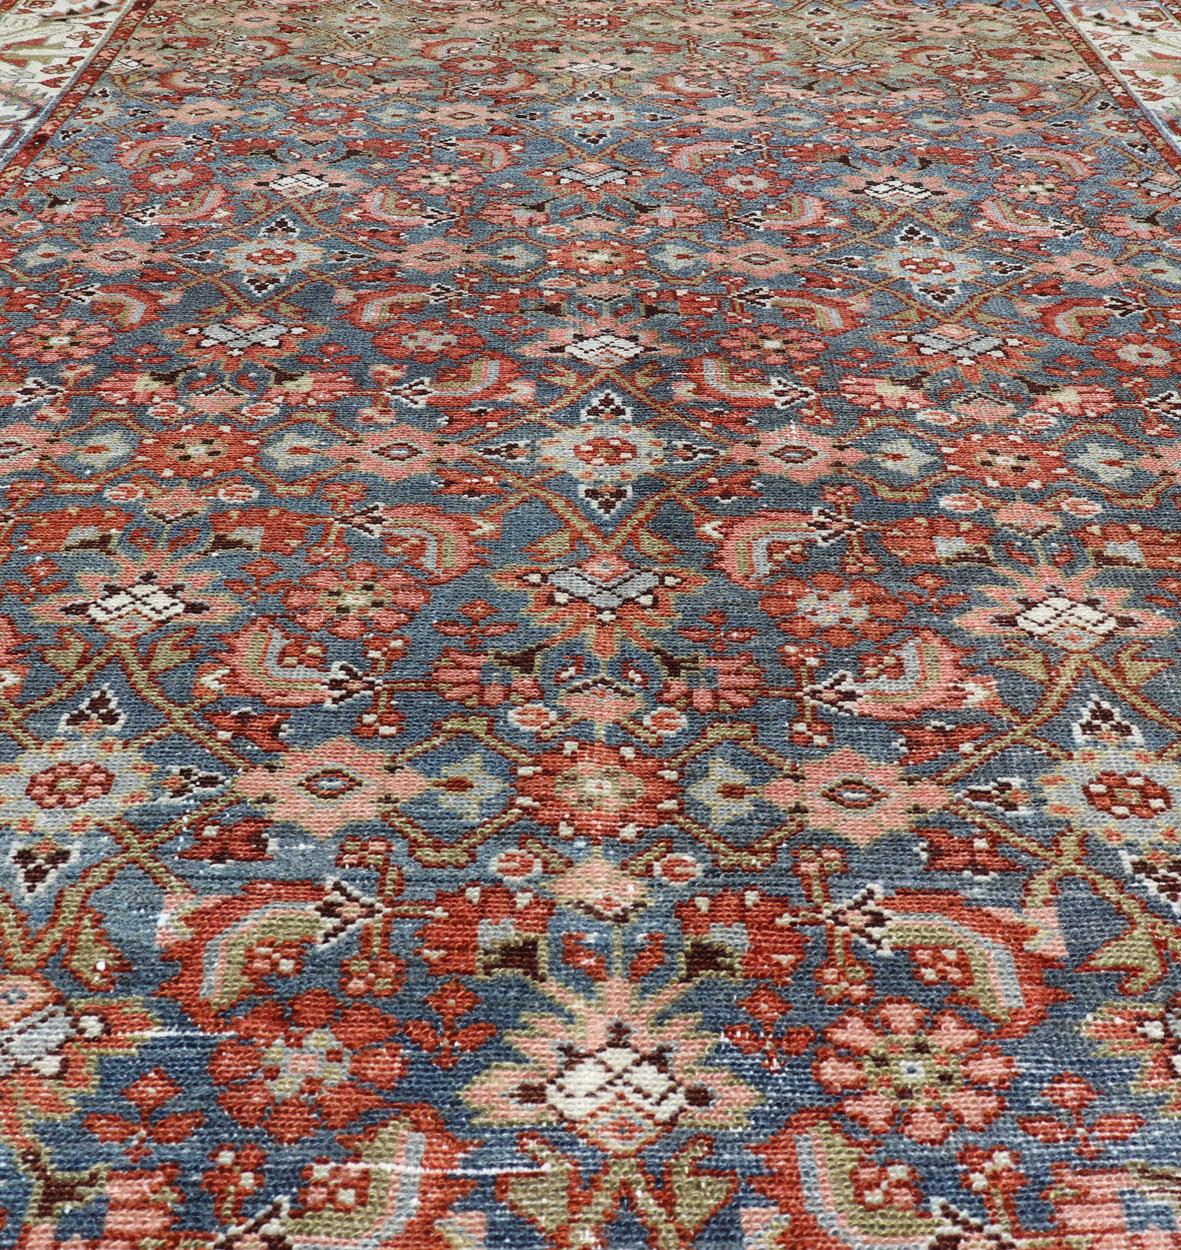 Antique Persian Malayer with All-Over Design in Red, Olive, and Blue 1